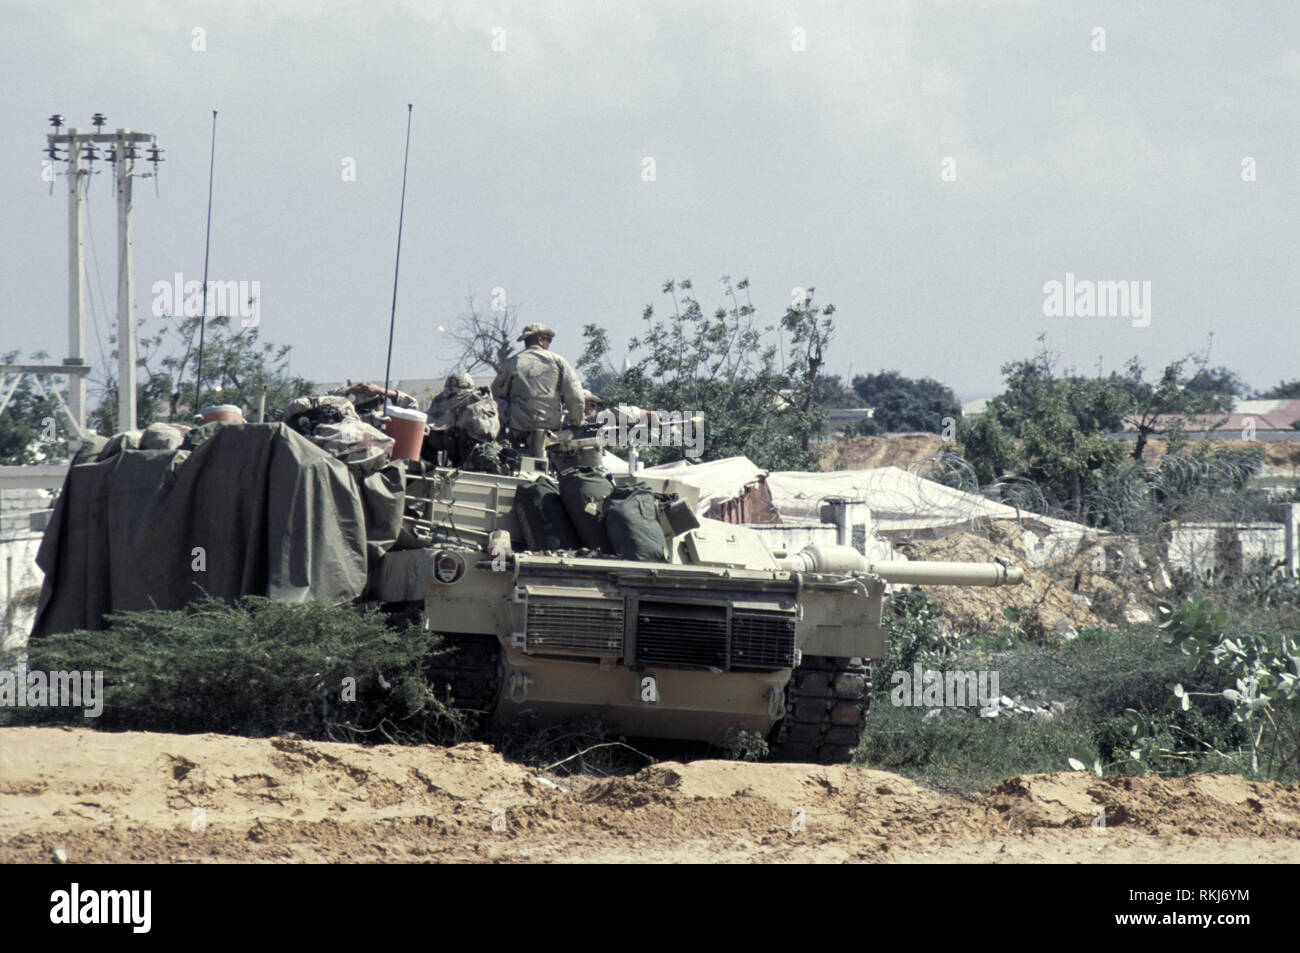 16th October 1993 A U.S. Army M1A1 Abrams tank of the 24th Infantry Division, 1st Battalion of the 64th Armored Regiment at UNOSOM Headquarters in Mogadishu, Somalia. Stock Photo